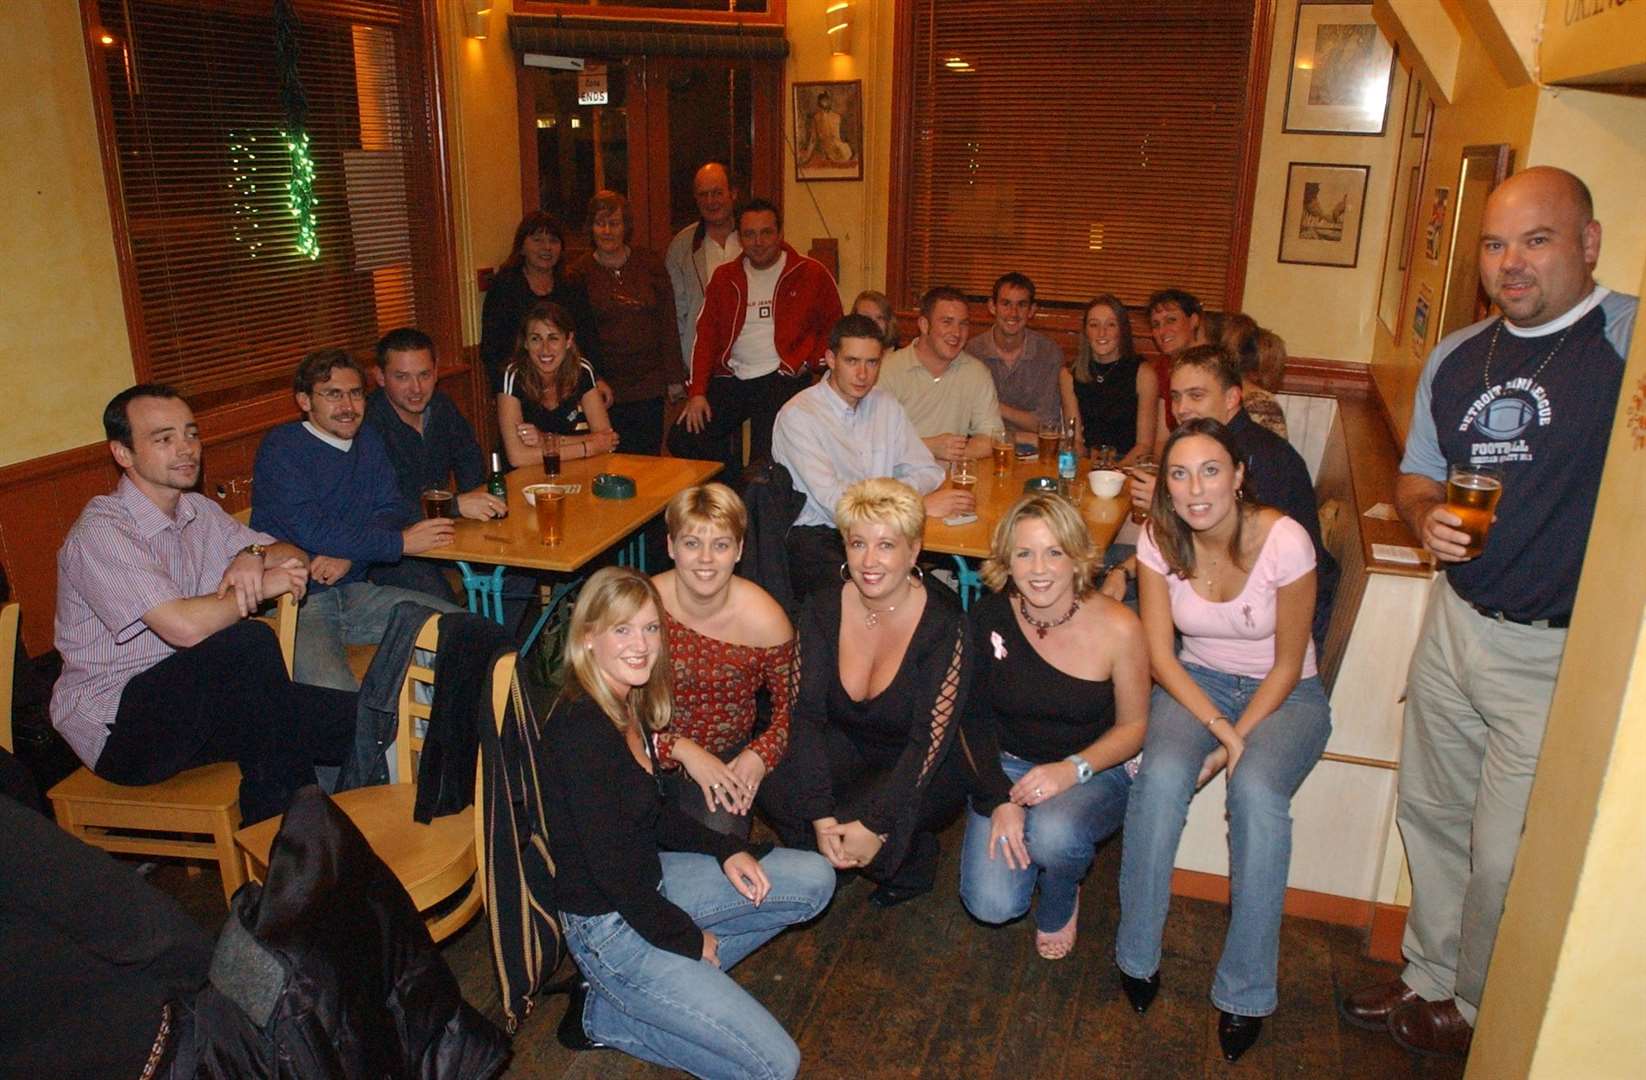 Quiz night at The Oranges pub, Ashford, in October 2002. The pub sadly closed in 2012. Picture: Mike Waterman